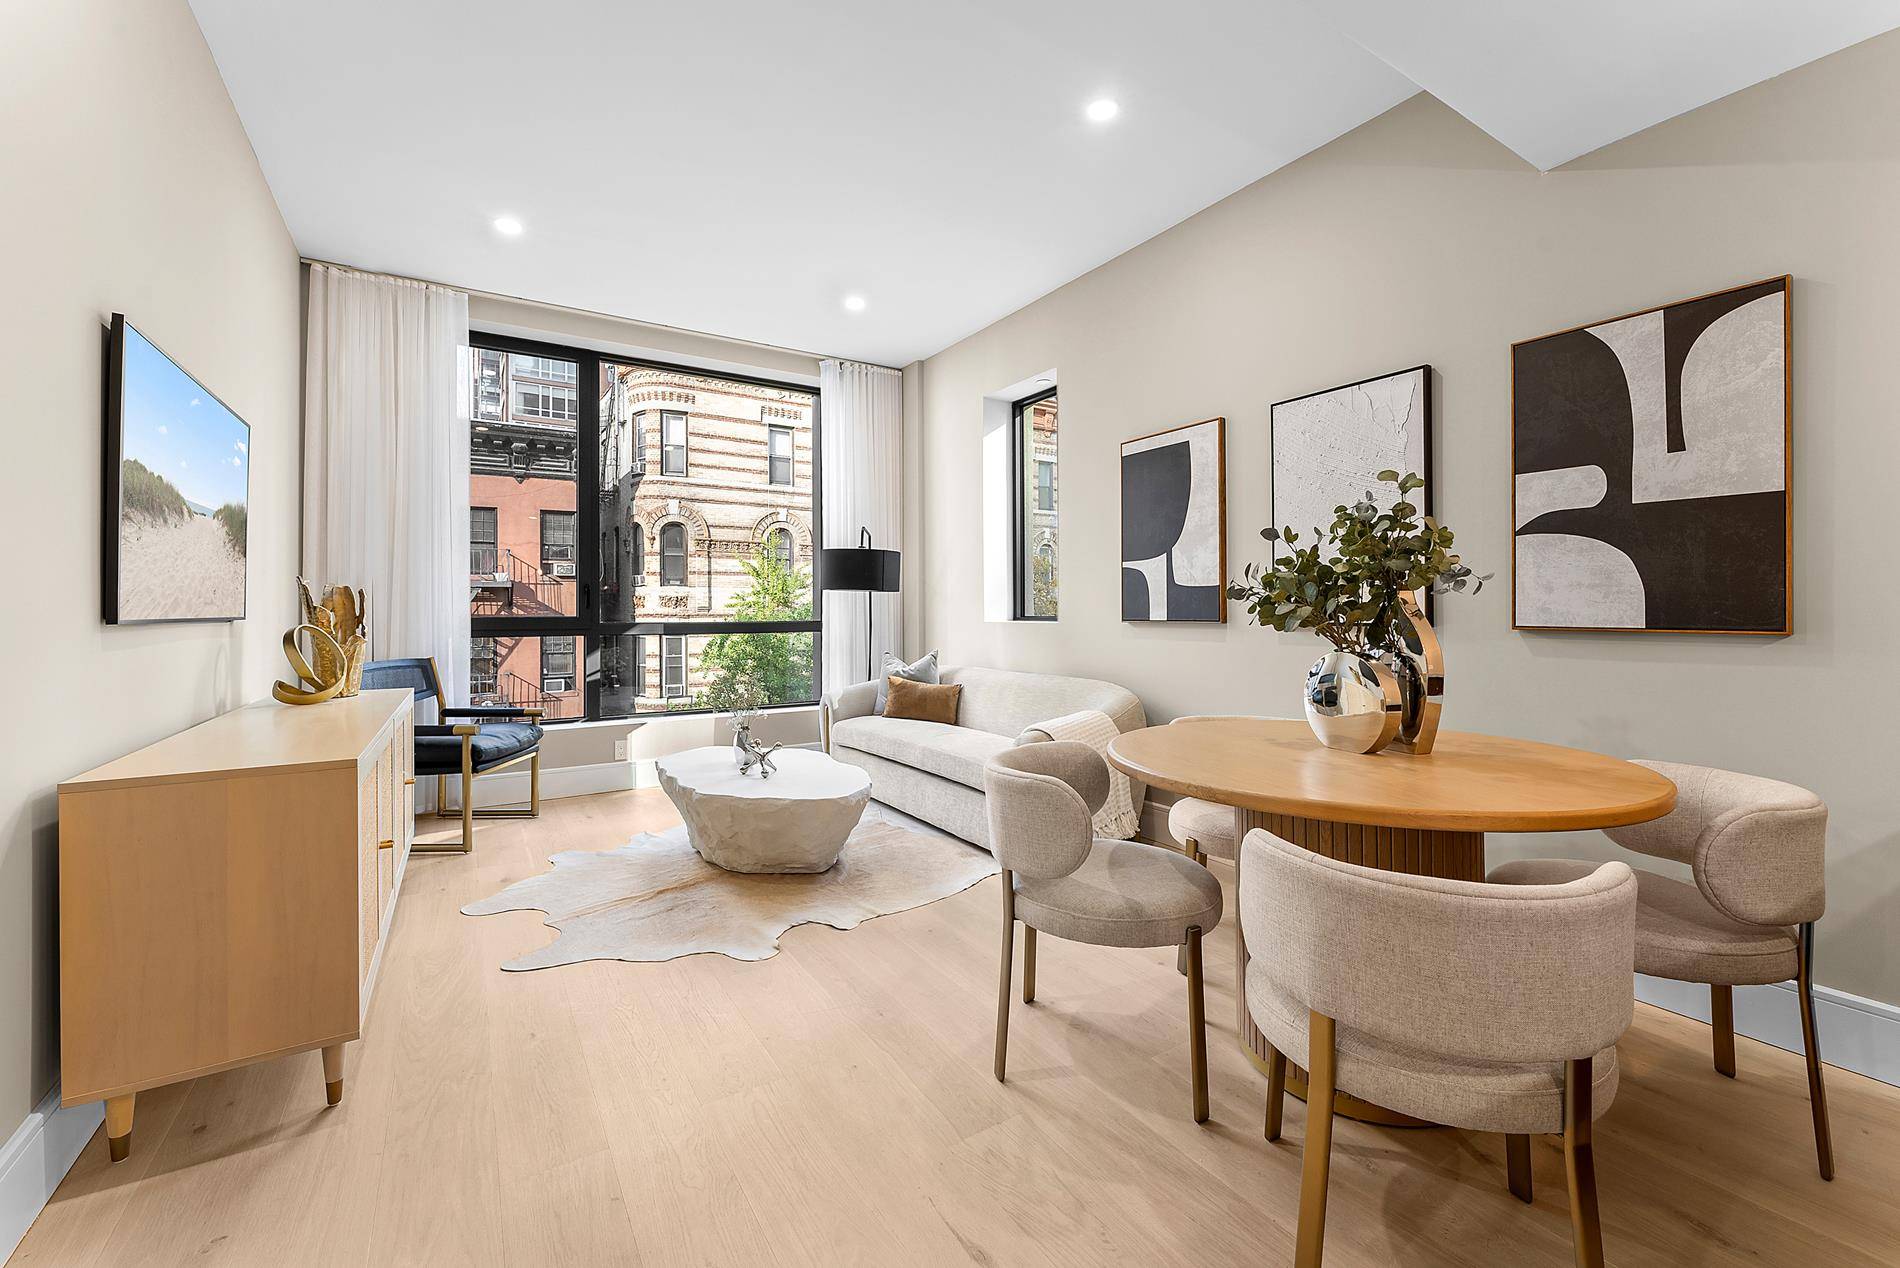 Model Residences Open by Appointment Anticipated Occupancy 2024Introducing Minuet Life in RhythmMinuet is an emblem of tranquility in the heart of Manhattan.